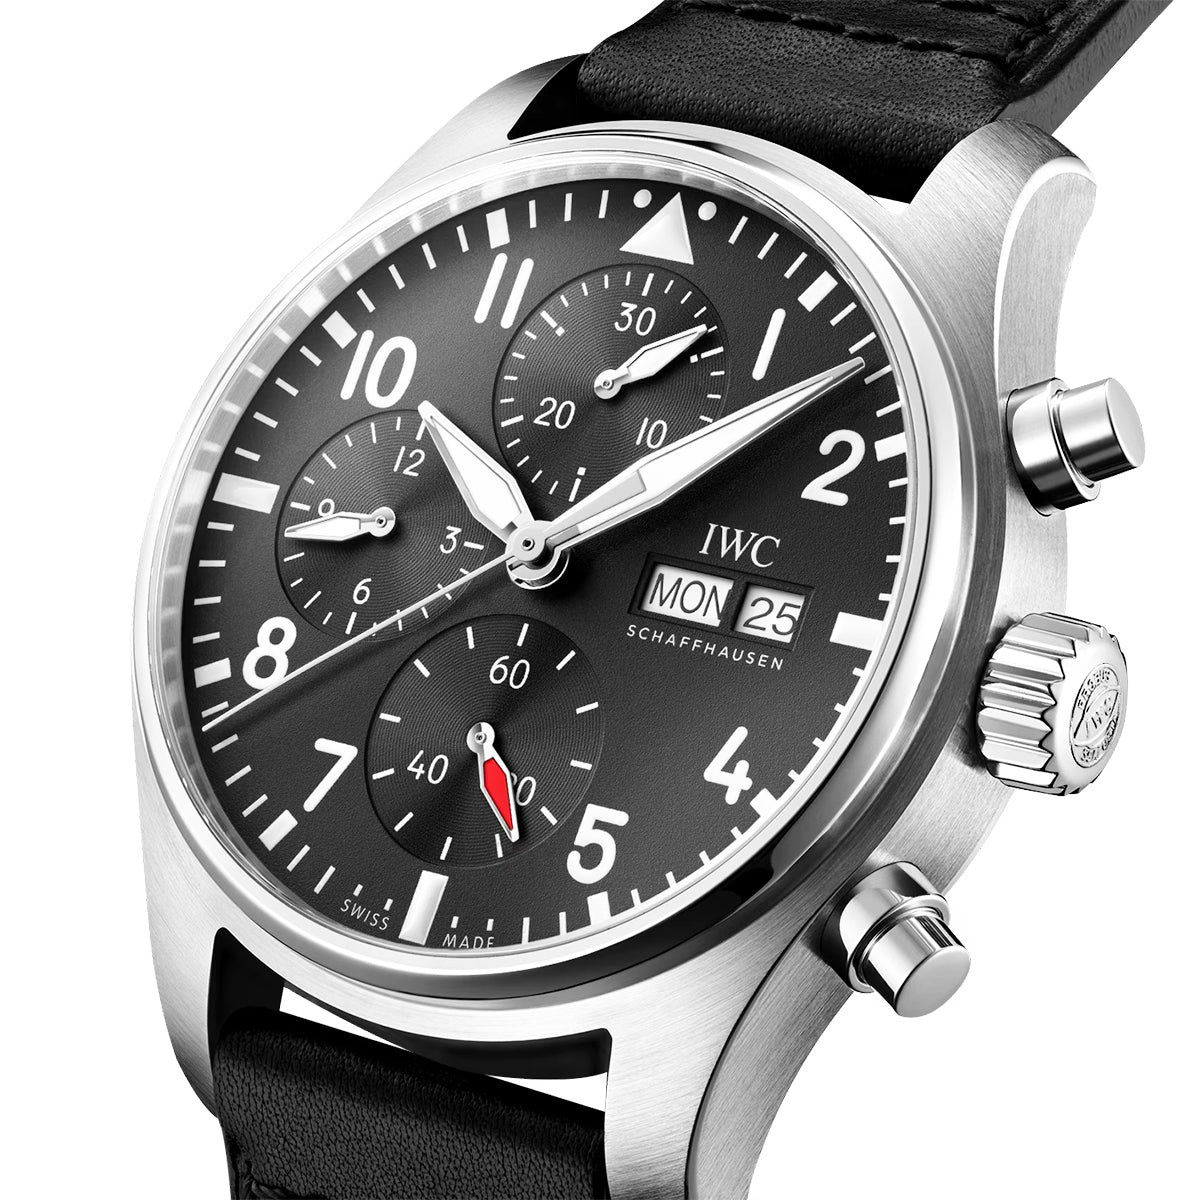 Pilot's 41mm Black Dial Chronograph Leather Strap Watch